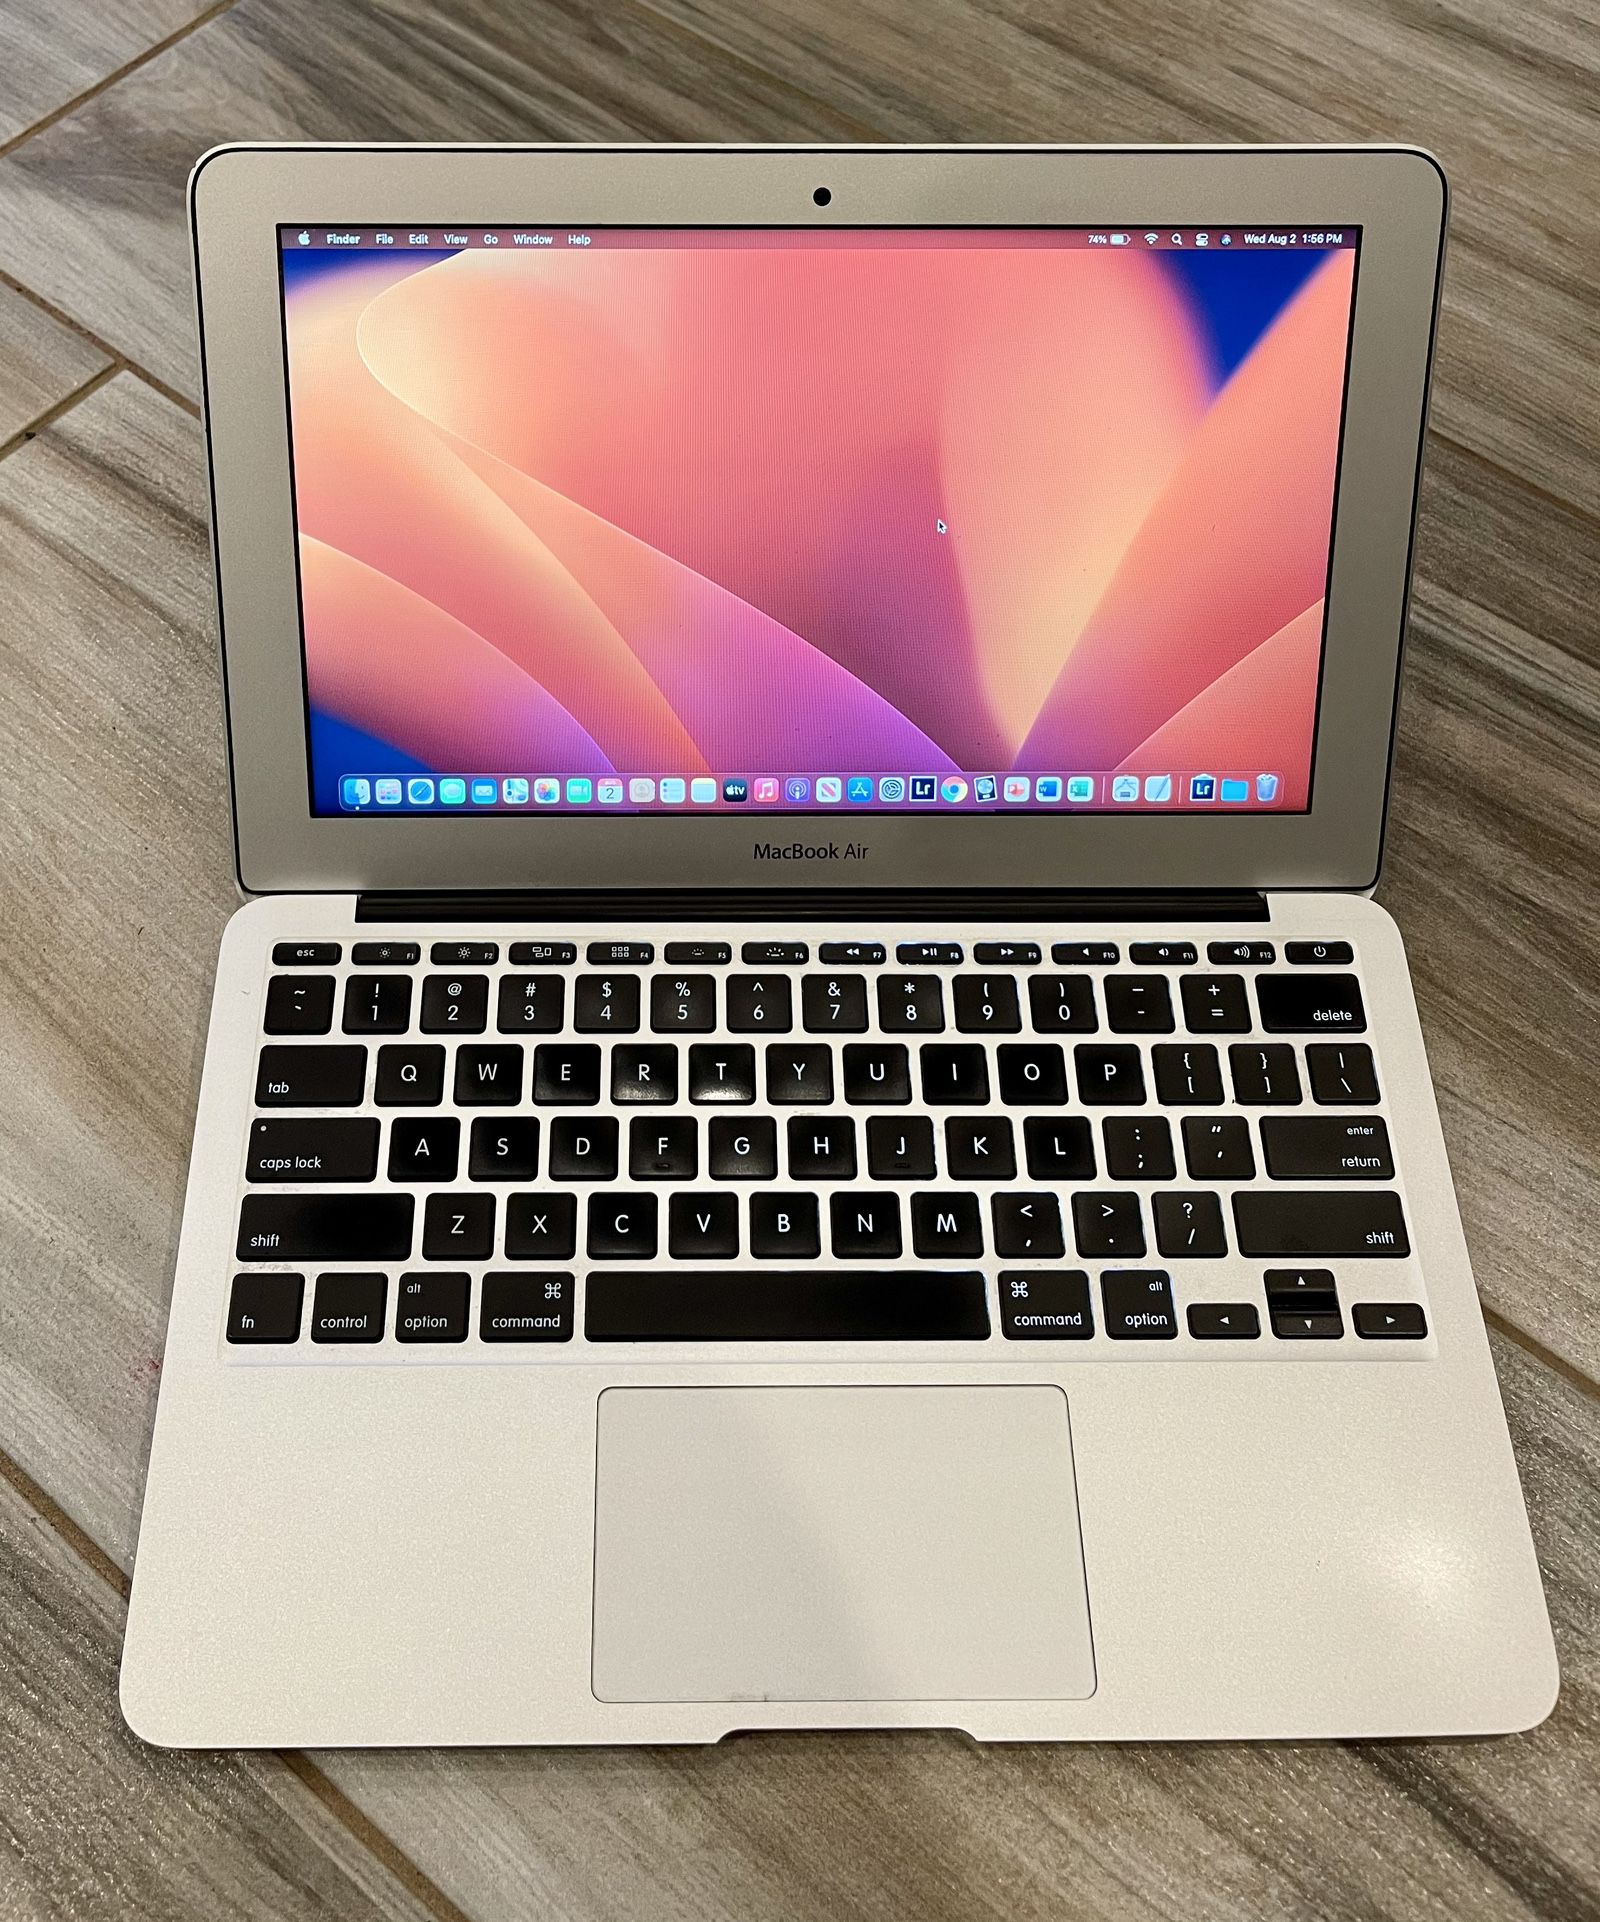 MacBook Air 11” Early-2014 for Sale in Plainfield, IL - OfferUp